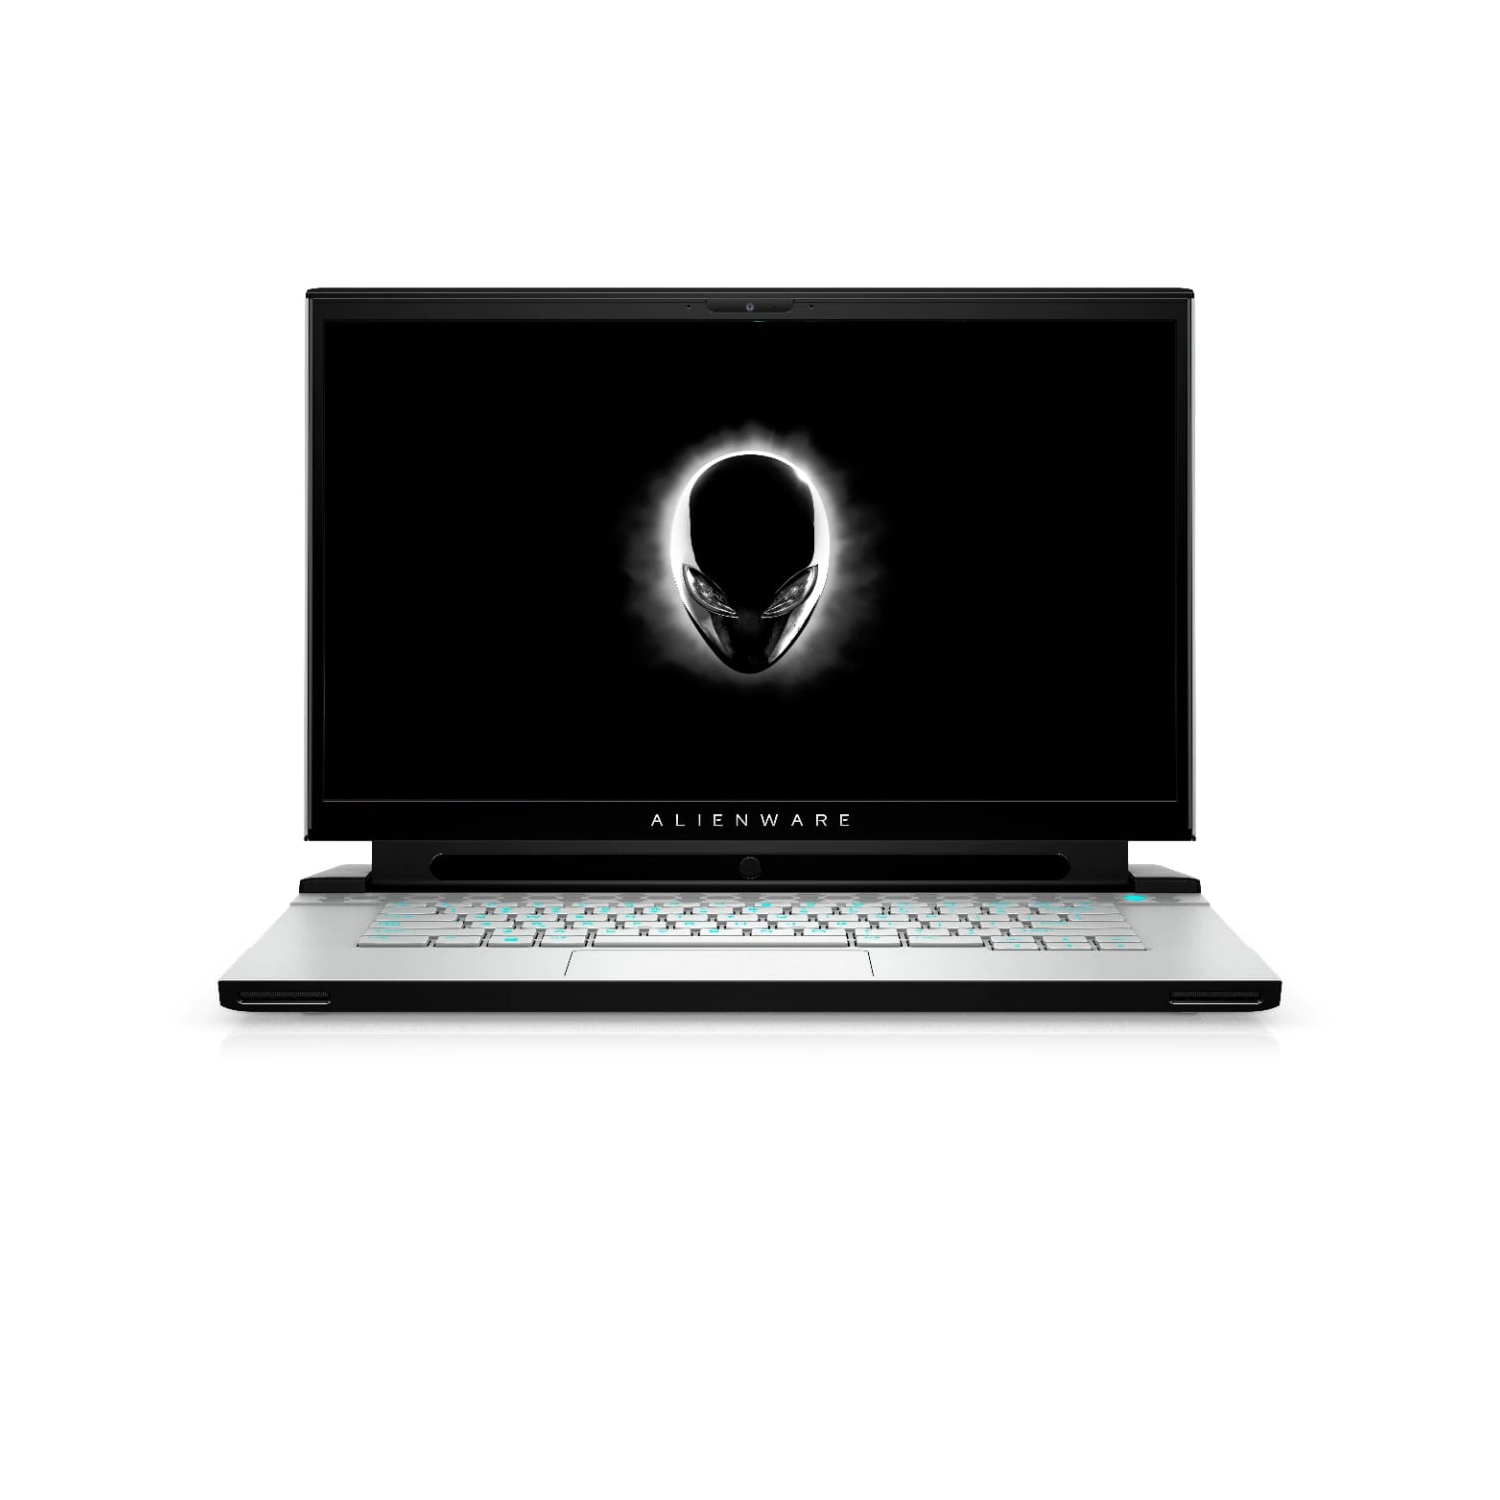 Refurbished (Excellent) - Dell Alienware m15 R3 Gaming Laptop (2020), 15.6" FHD, Core i7, 256GB SSD + 256GB SSD, 16GB RAM, RTX 2060, 5 GHz, 10th Gen CPU Certified